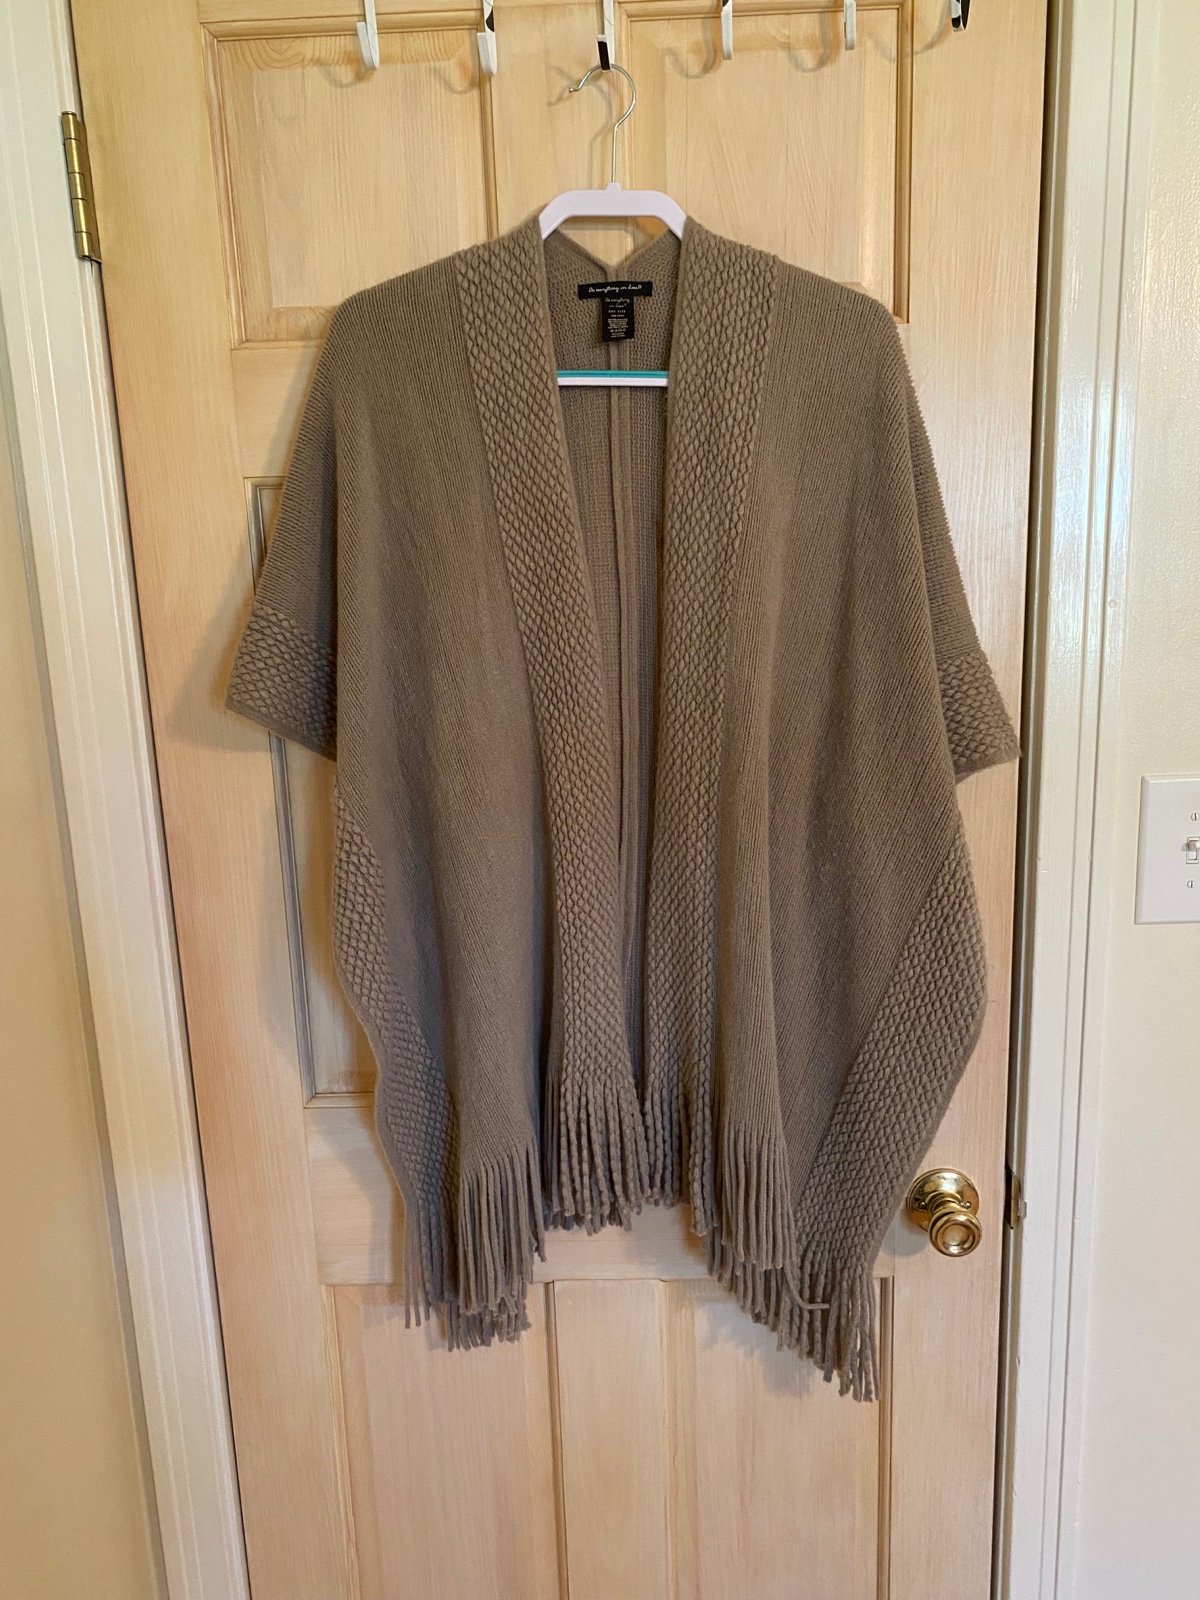 Beautiful Poncho sweater nz1Jzn7HF all for you